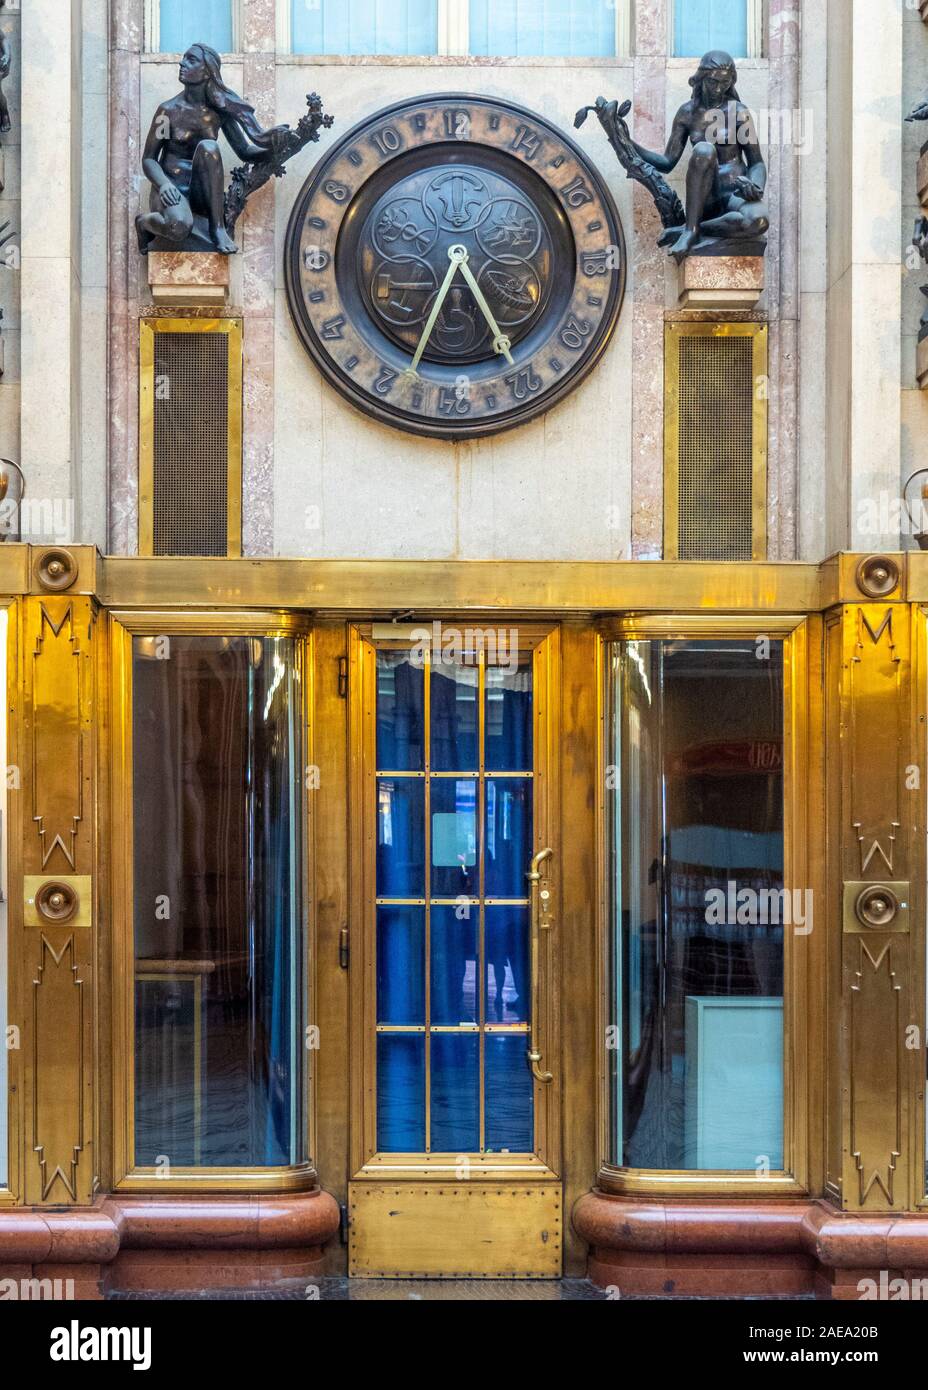 Decorative and ornate Art Deco style bronze statuettes and 24 hour clock  in foyer of Adria Passage Adria Palace New Town Prague Czech Republic. Stock Photo